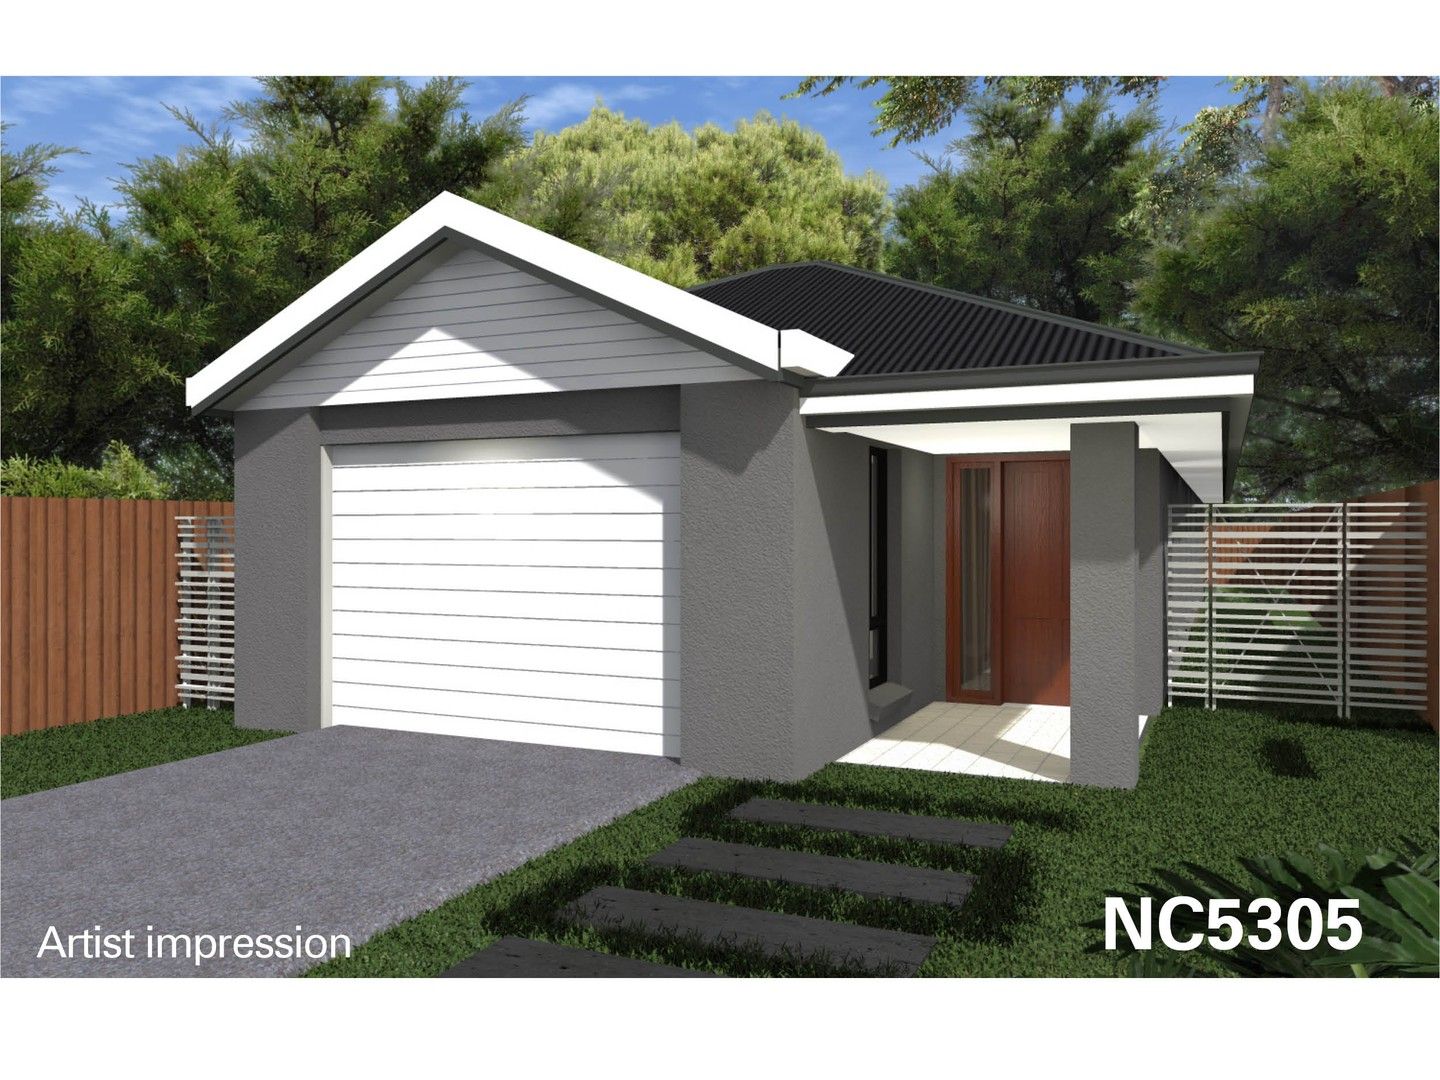 3 bedrooms New House & Land in Lot 2/41 Mcilwraith St EVERTON PARK QLD, 4053